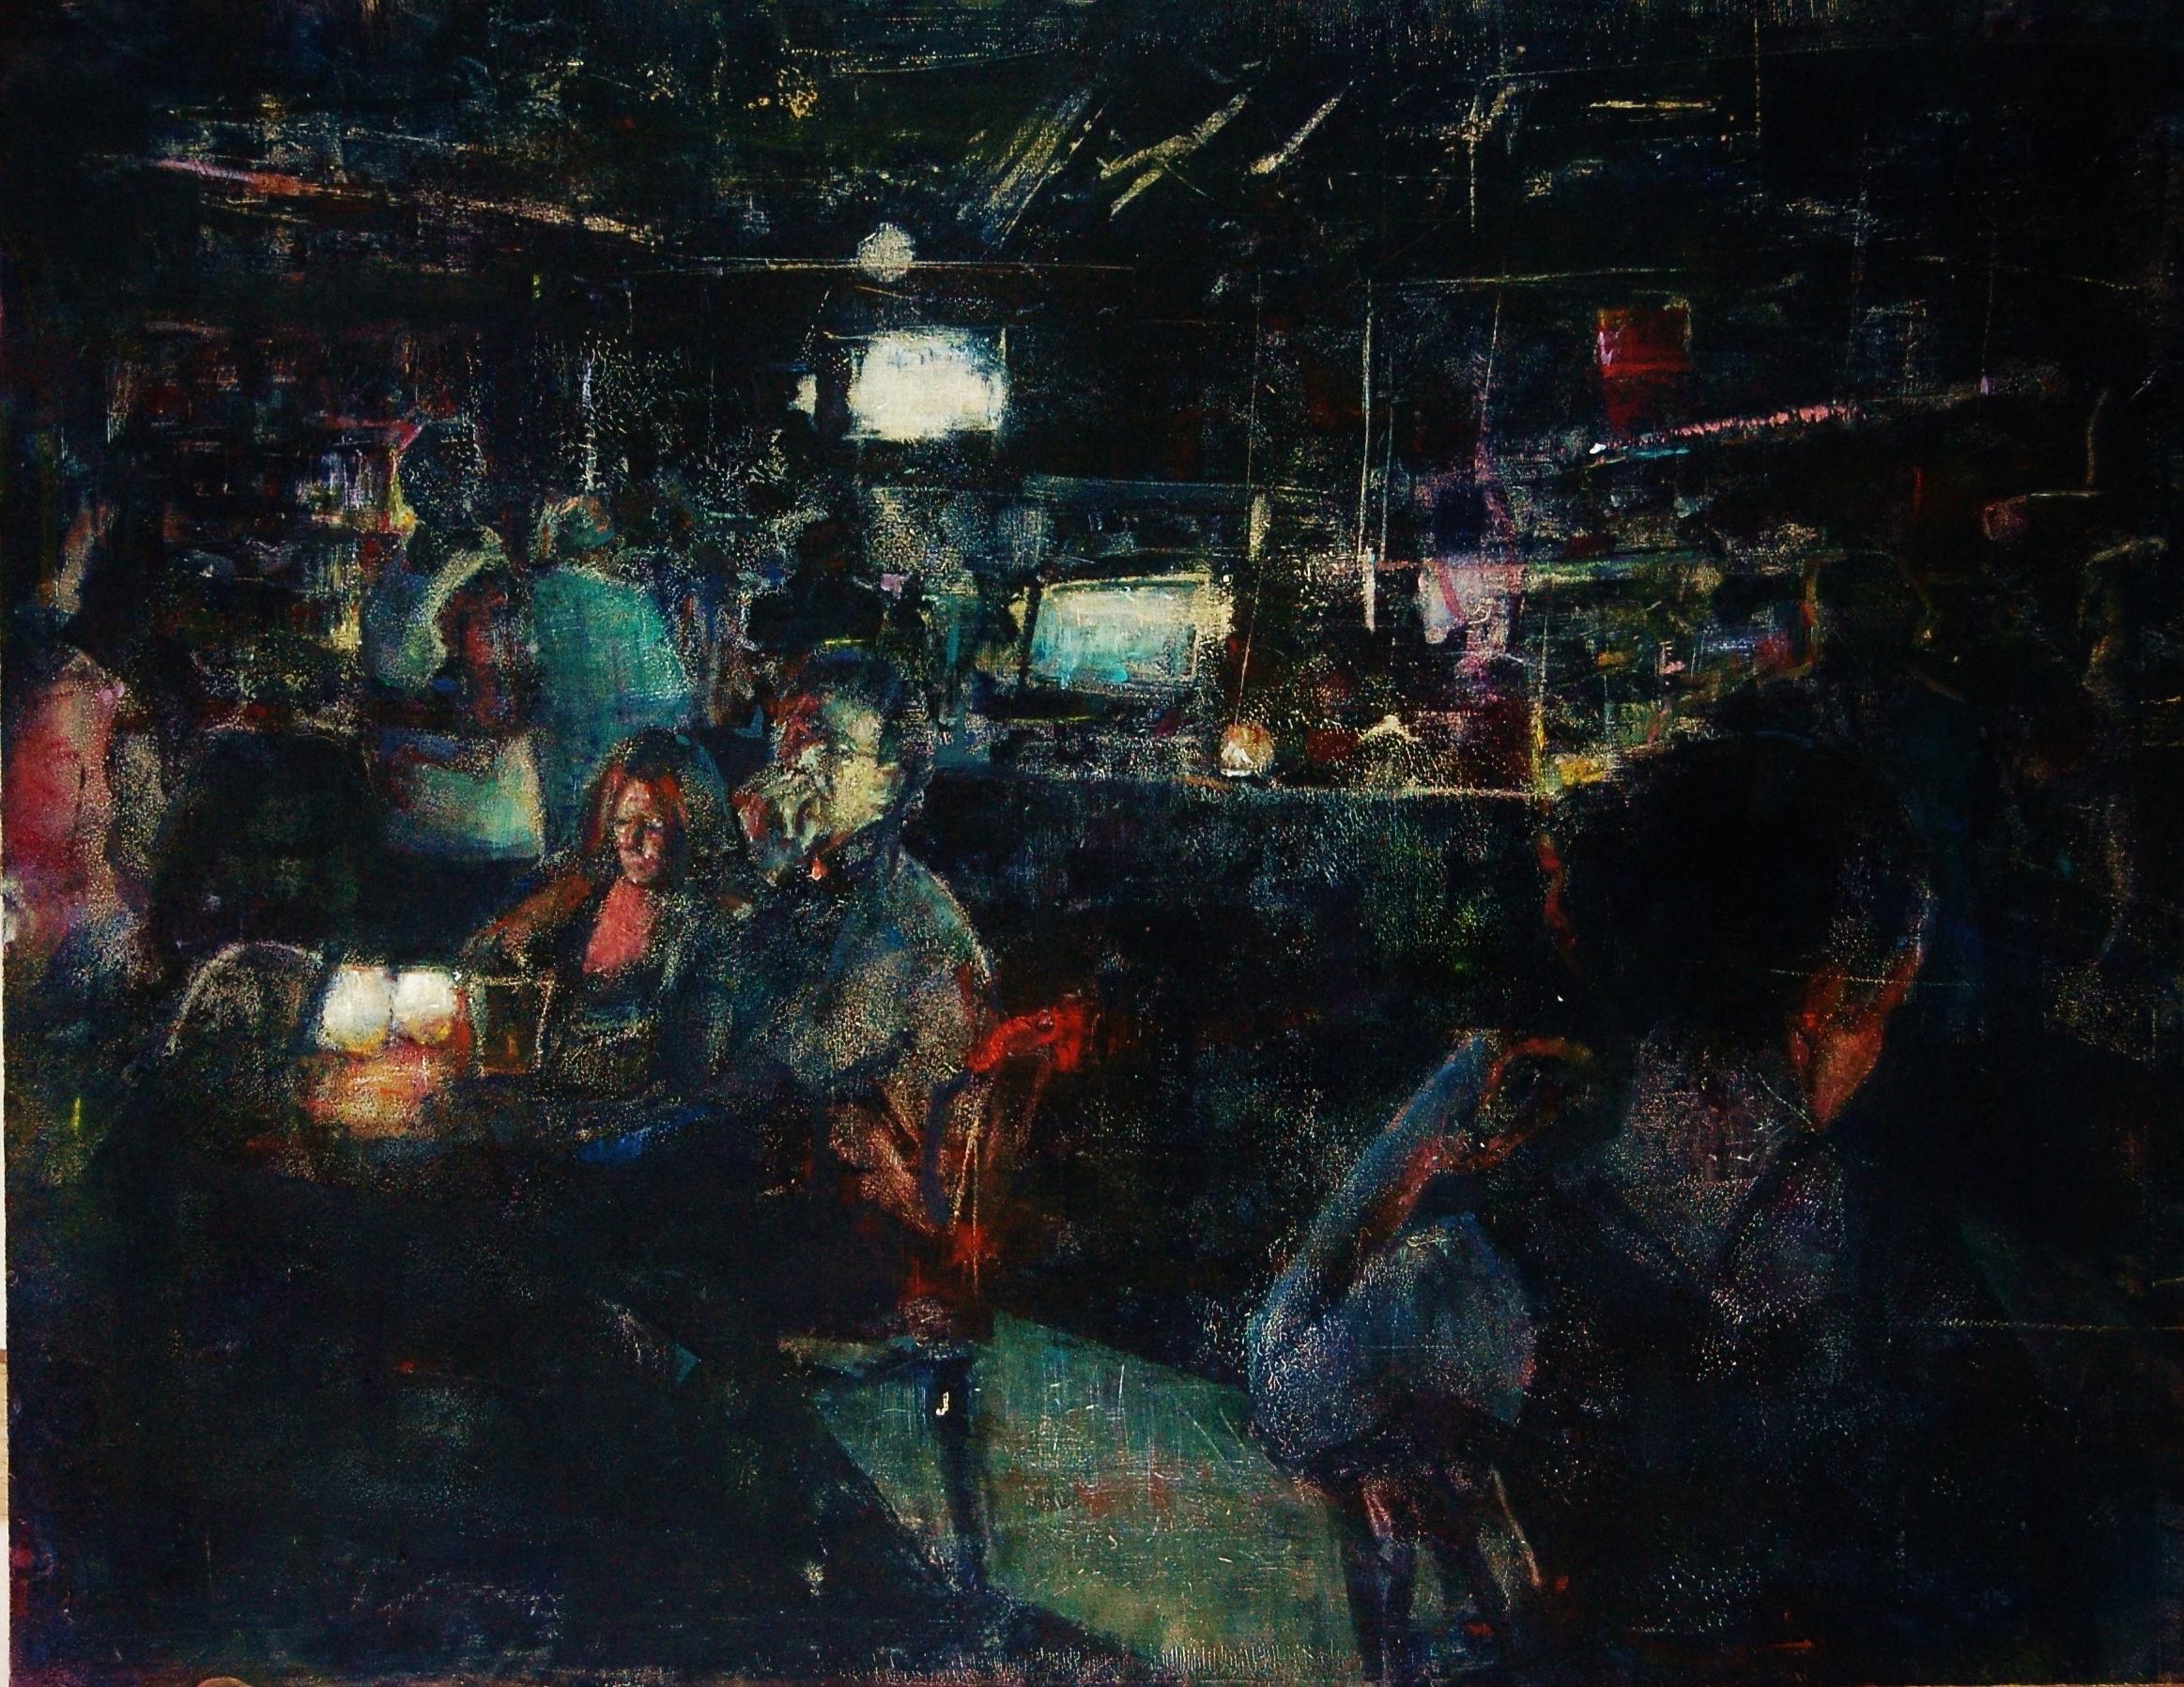 Desire- 21st Century Contemporary Painting of a Café Interior with People